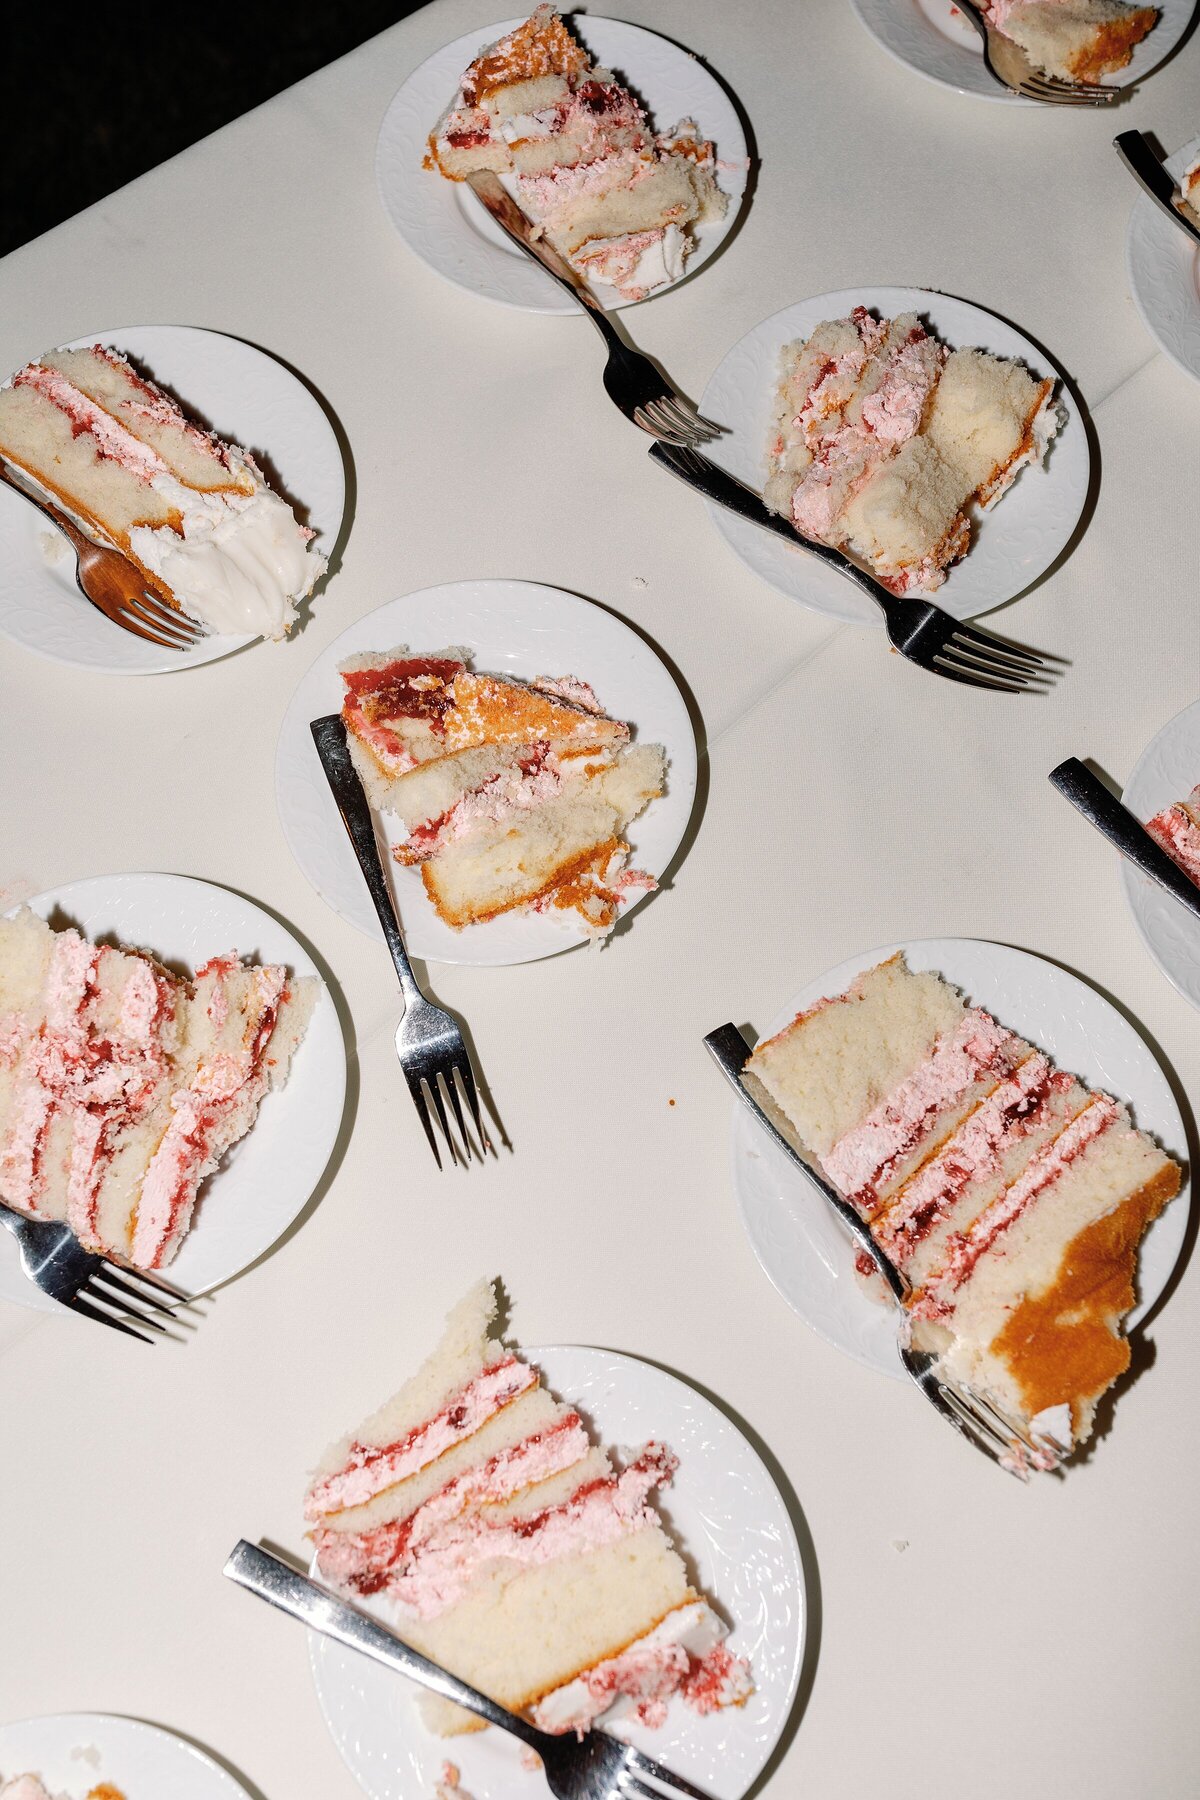 Slices of wedding cake with strawberry filling covering table